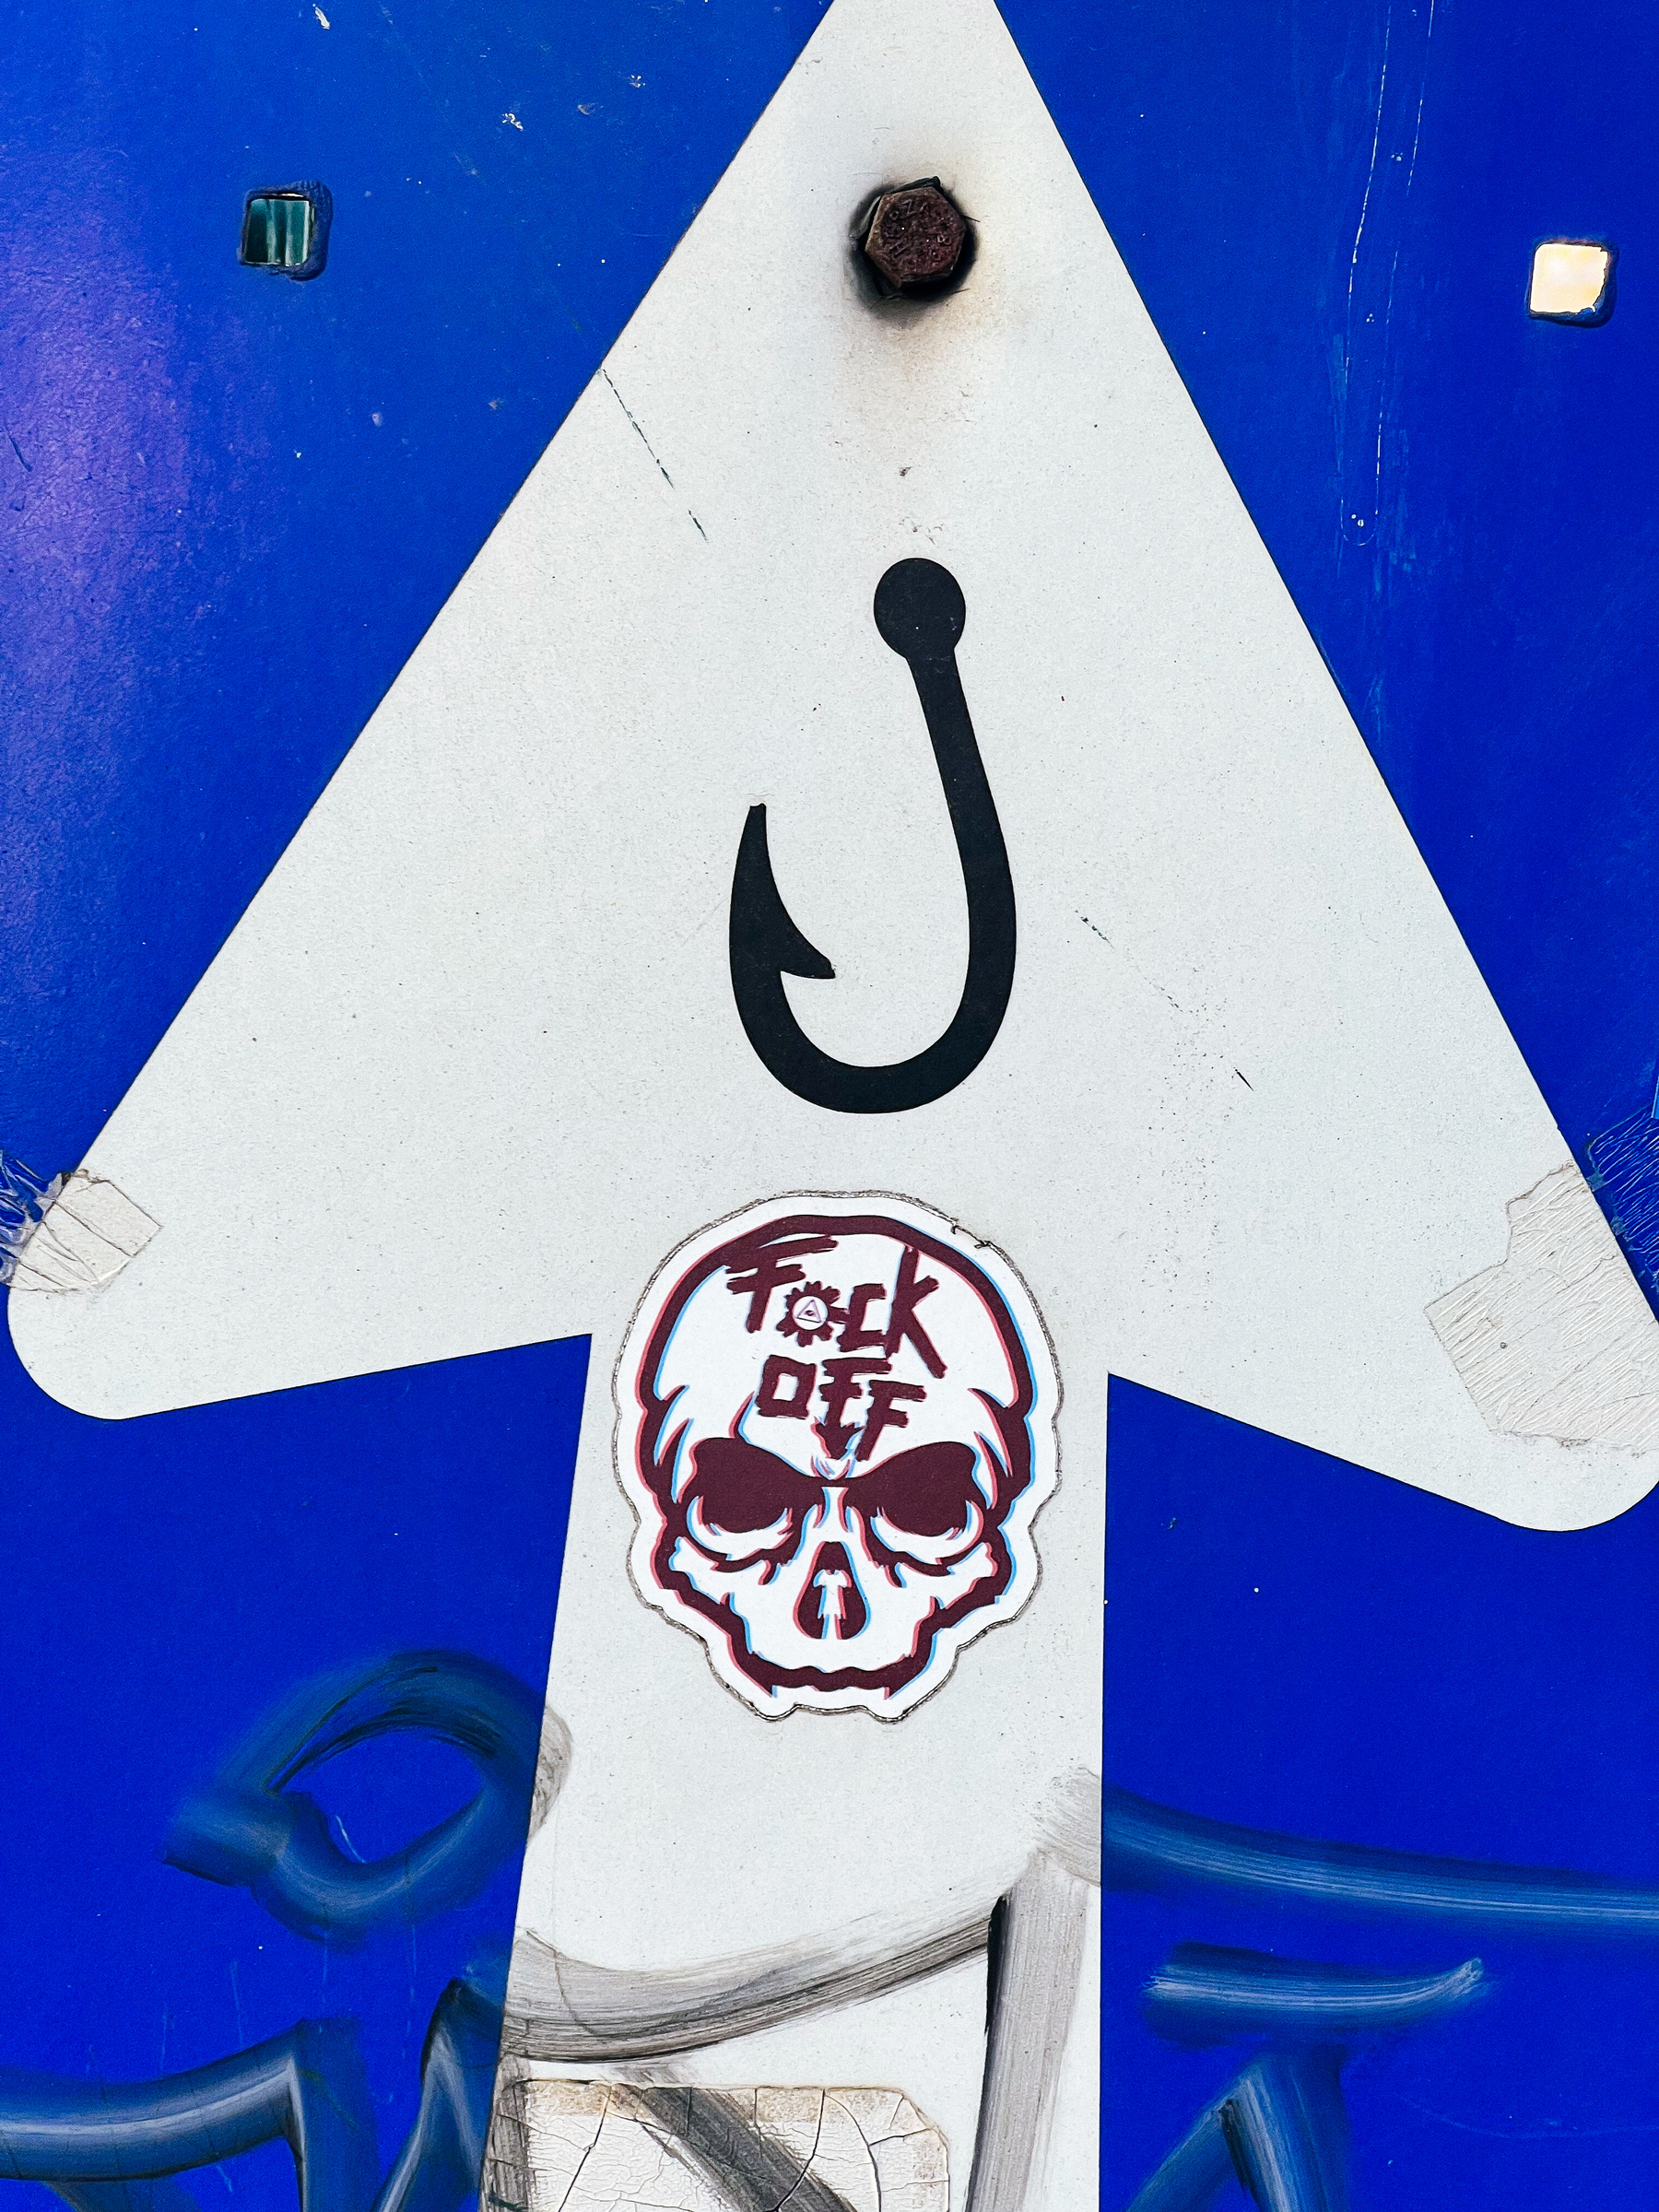 A skull with “Fock Off” written on it, and a fishing hook. Both stickers on a traffic sign. 